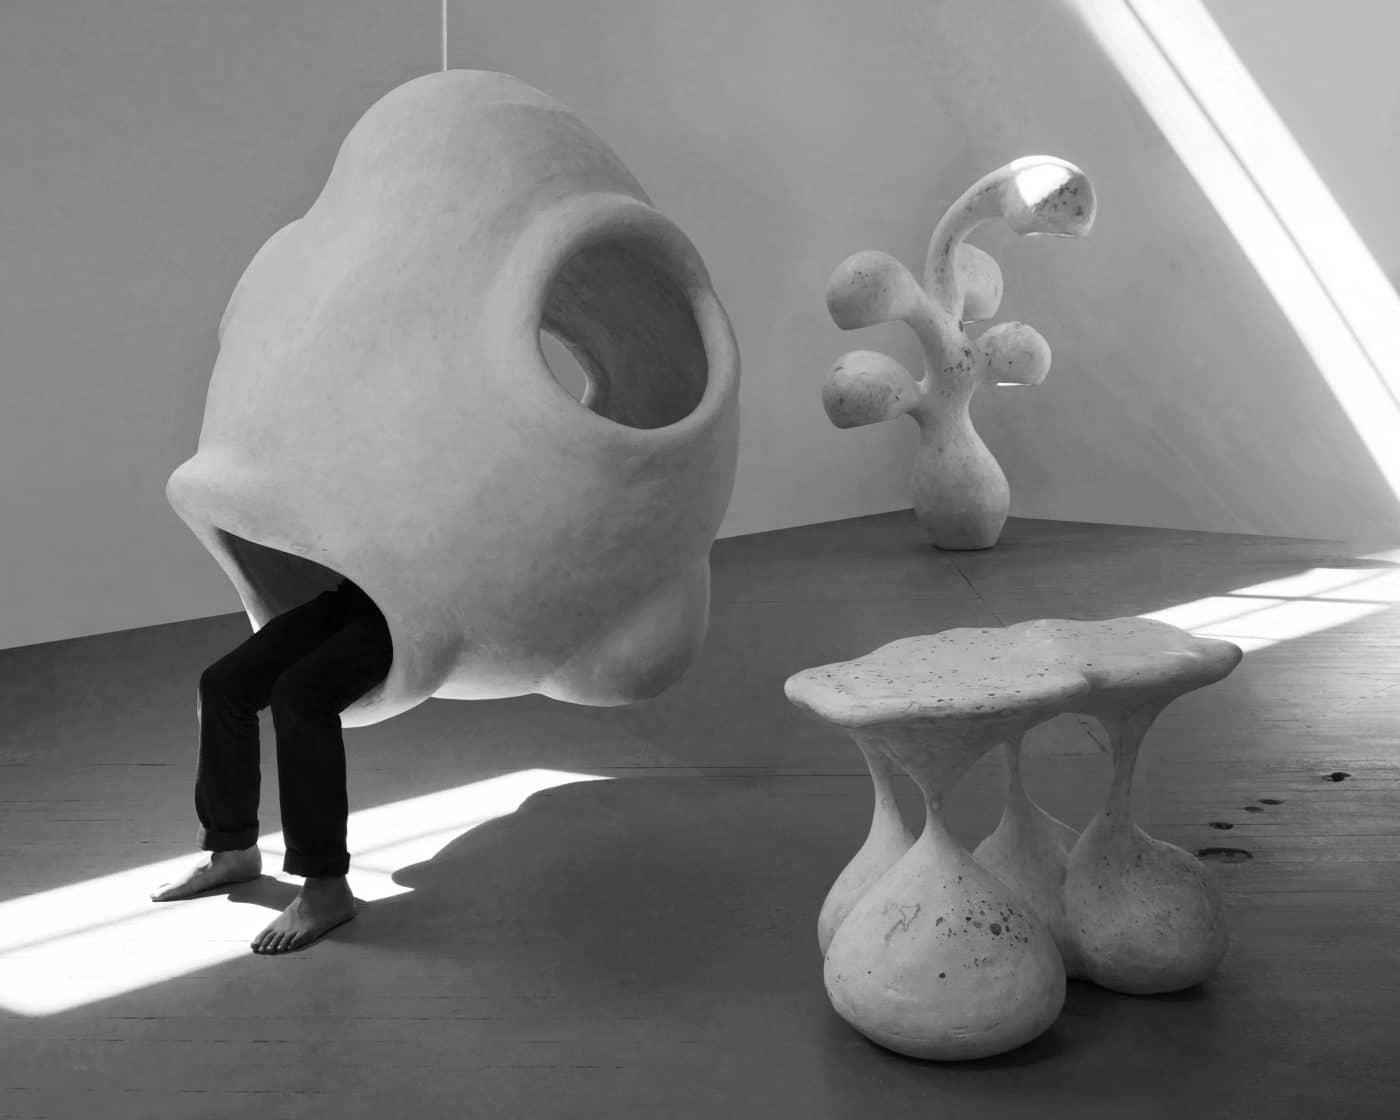 Rogan Gregory's Hermaphroditee sitting environment, Fertility Form illuminated sculpture and untitled terrazzo side table